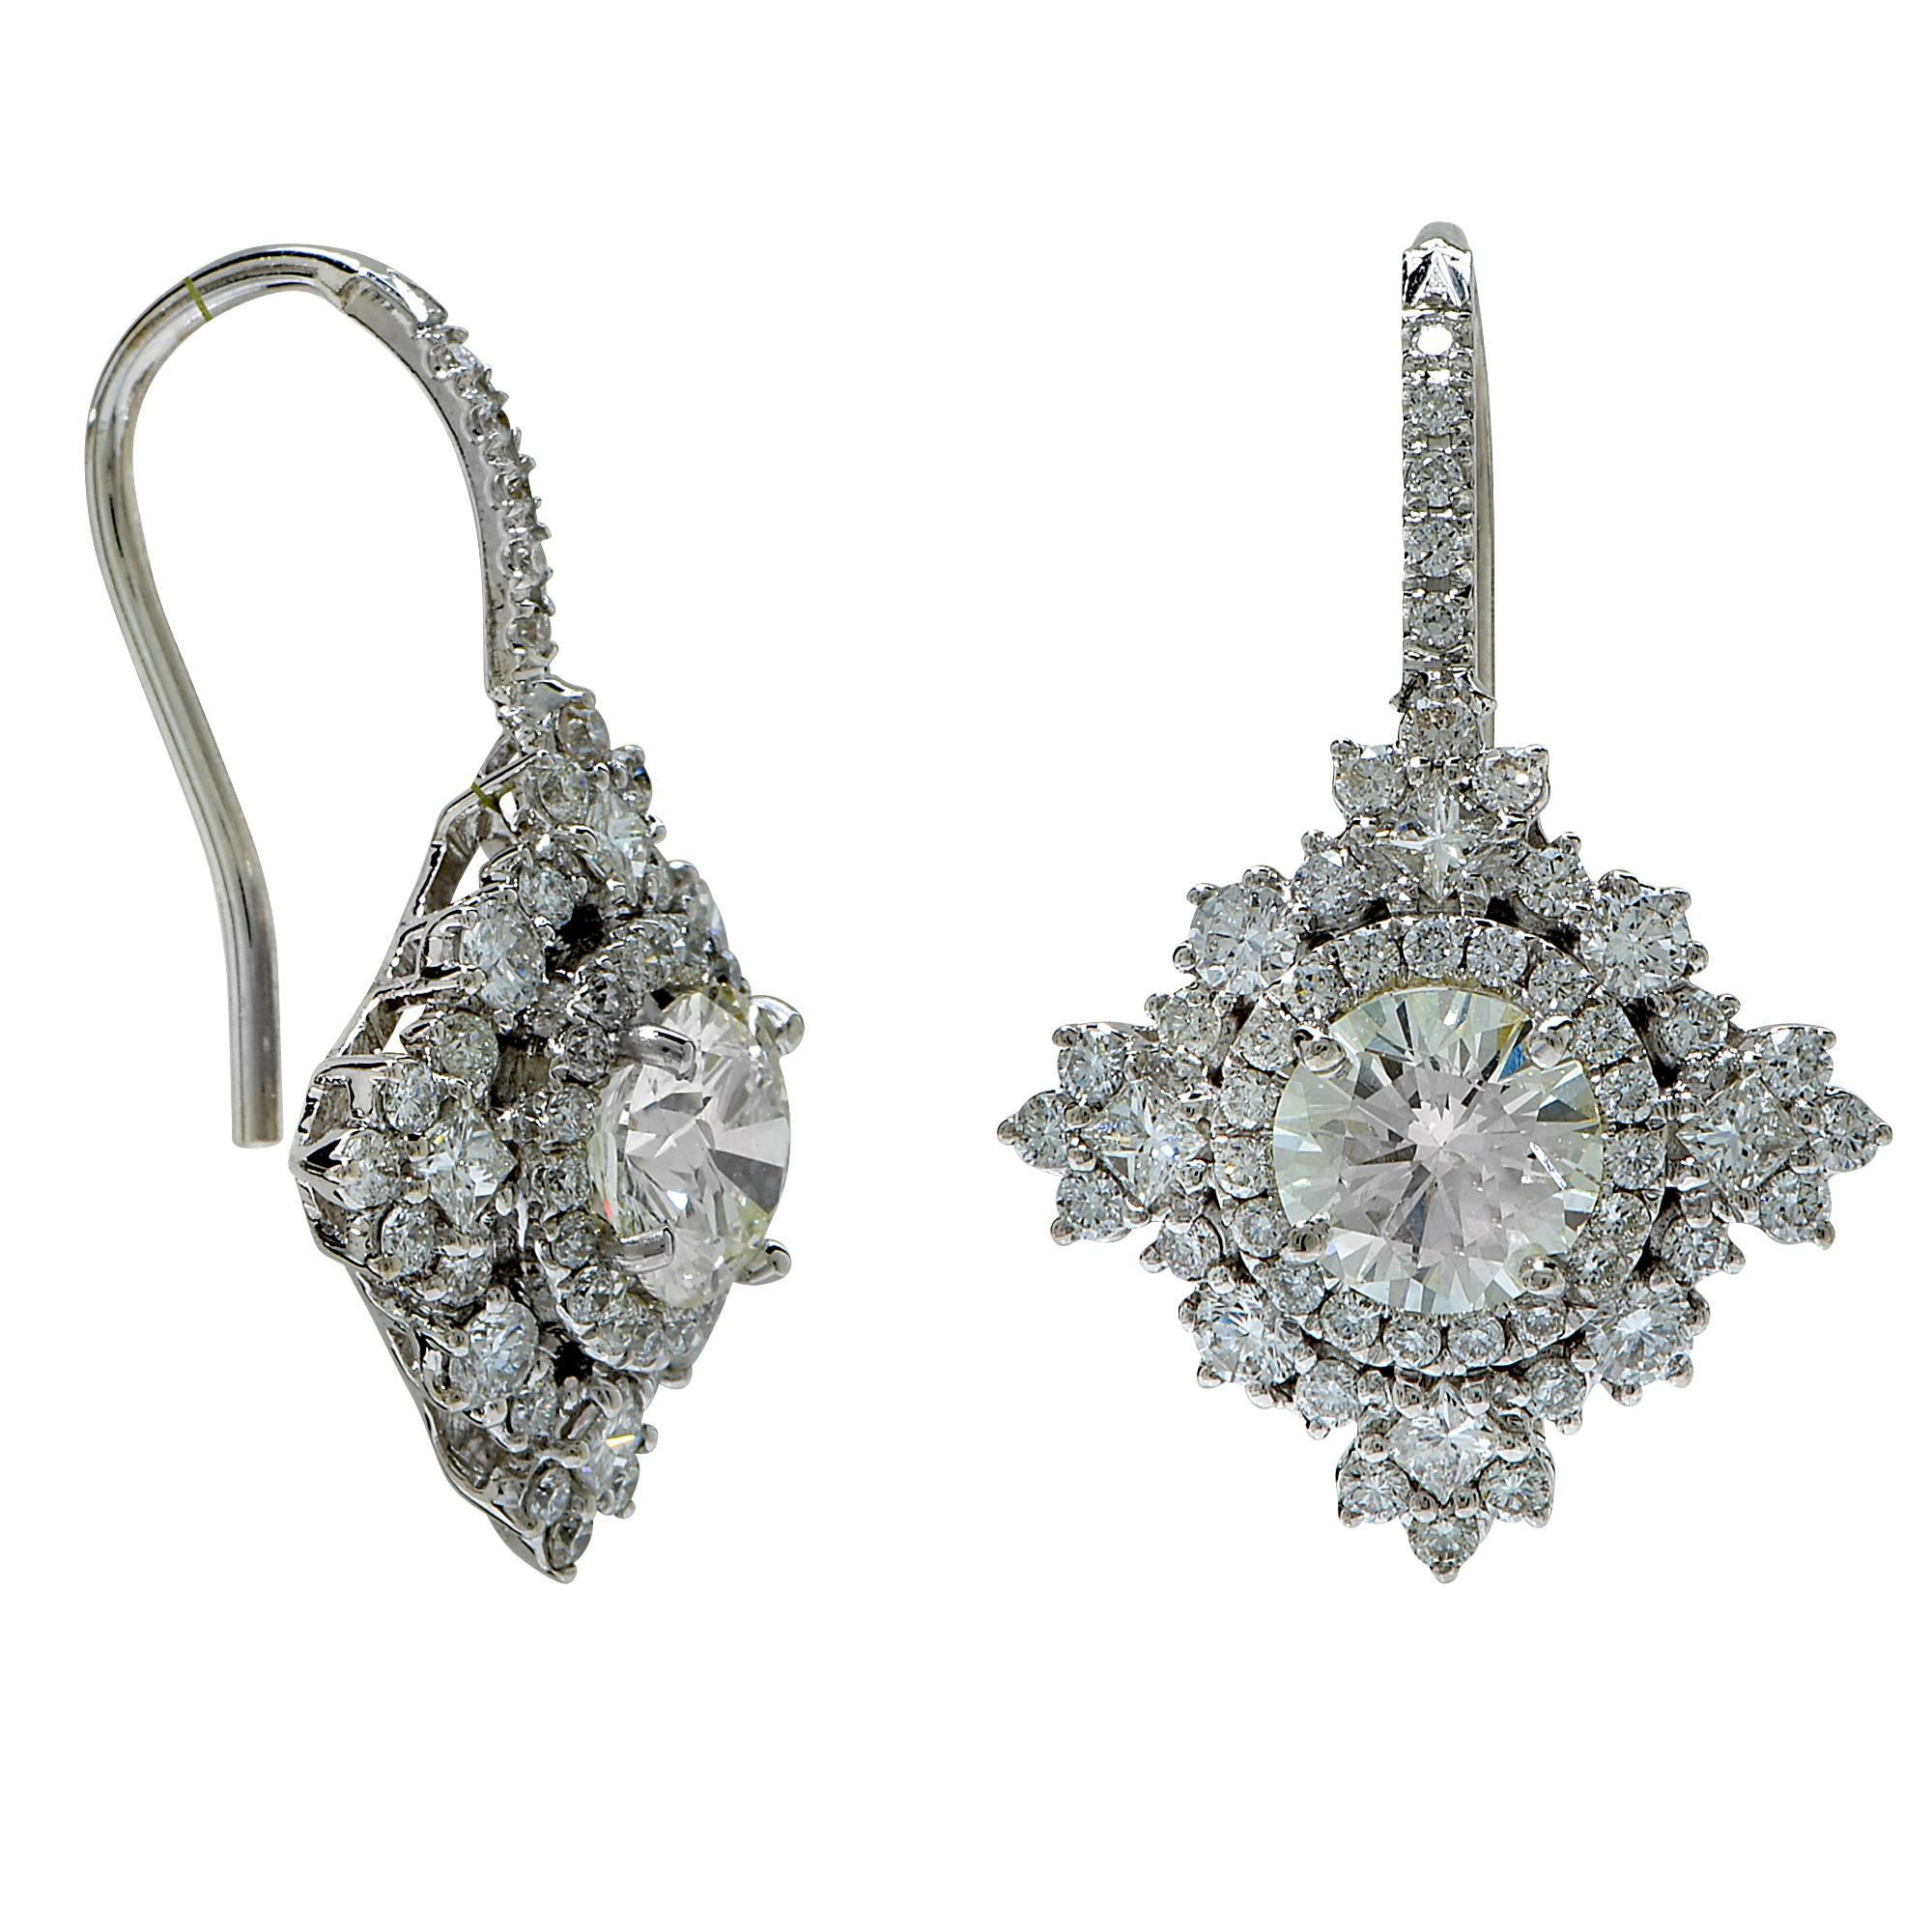 18k white gold earrings featuring 2 round brilliant cut diamonds weighing 1.50cts total, G color, SI3 clarity, accented by 114 round brilliant cut diamonds weighing 1.24cts total, G color VS clarity.

These diamond earrings are accompanied by a